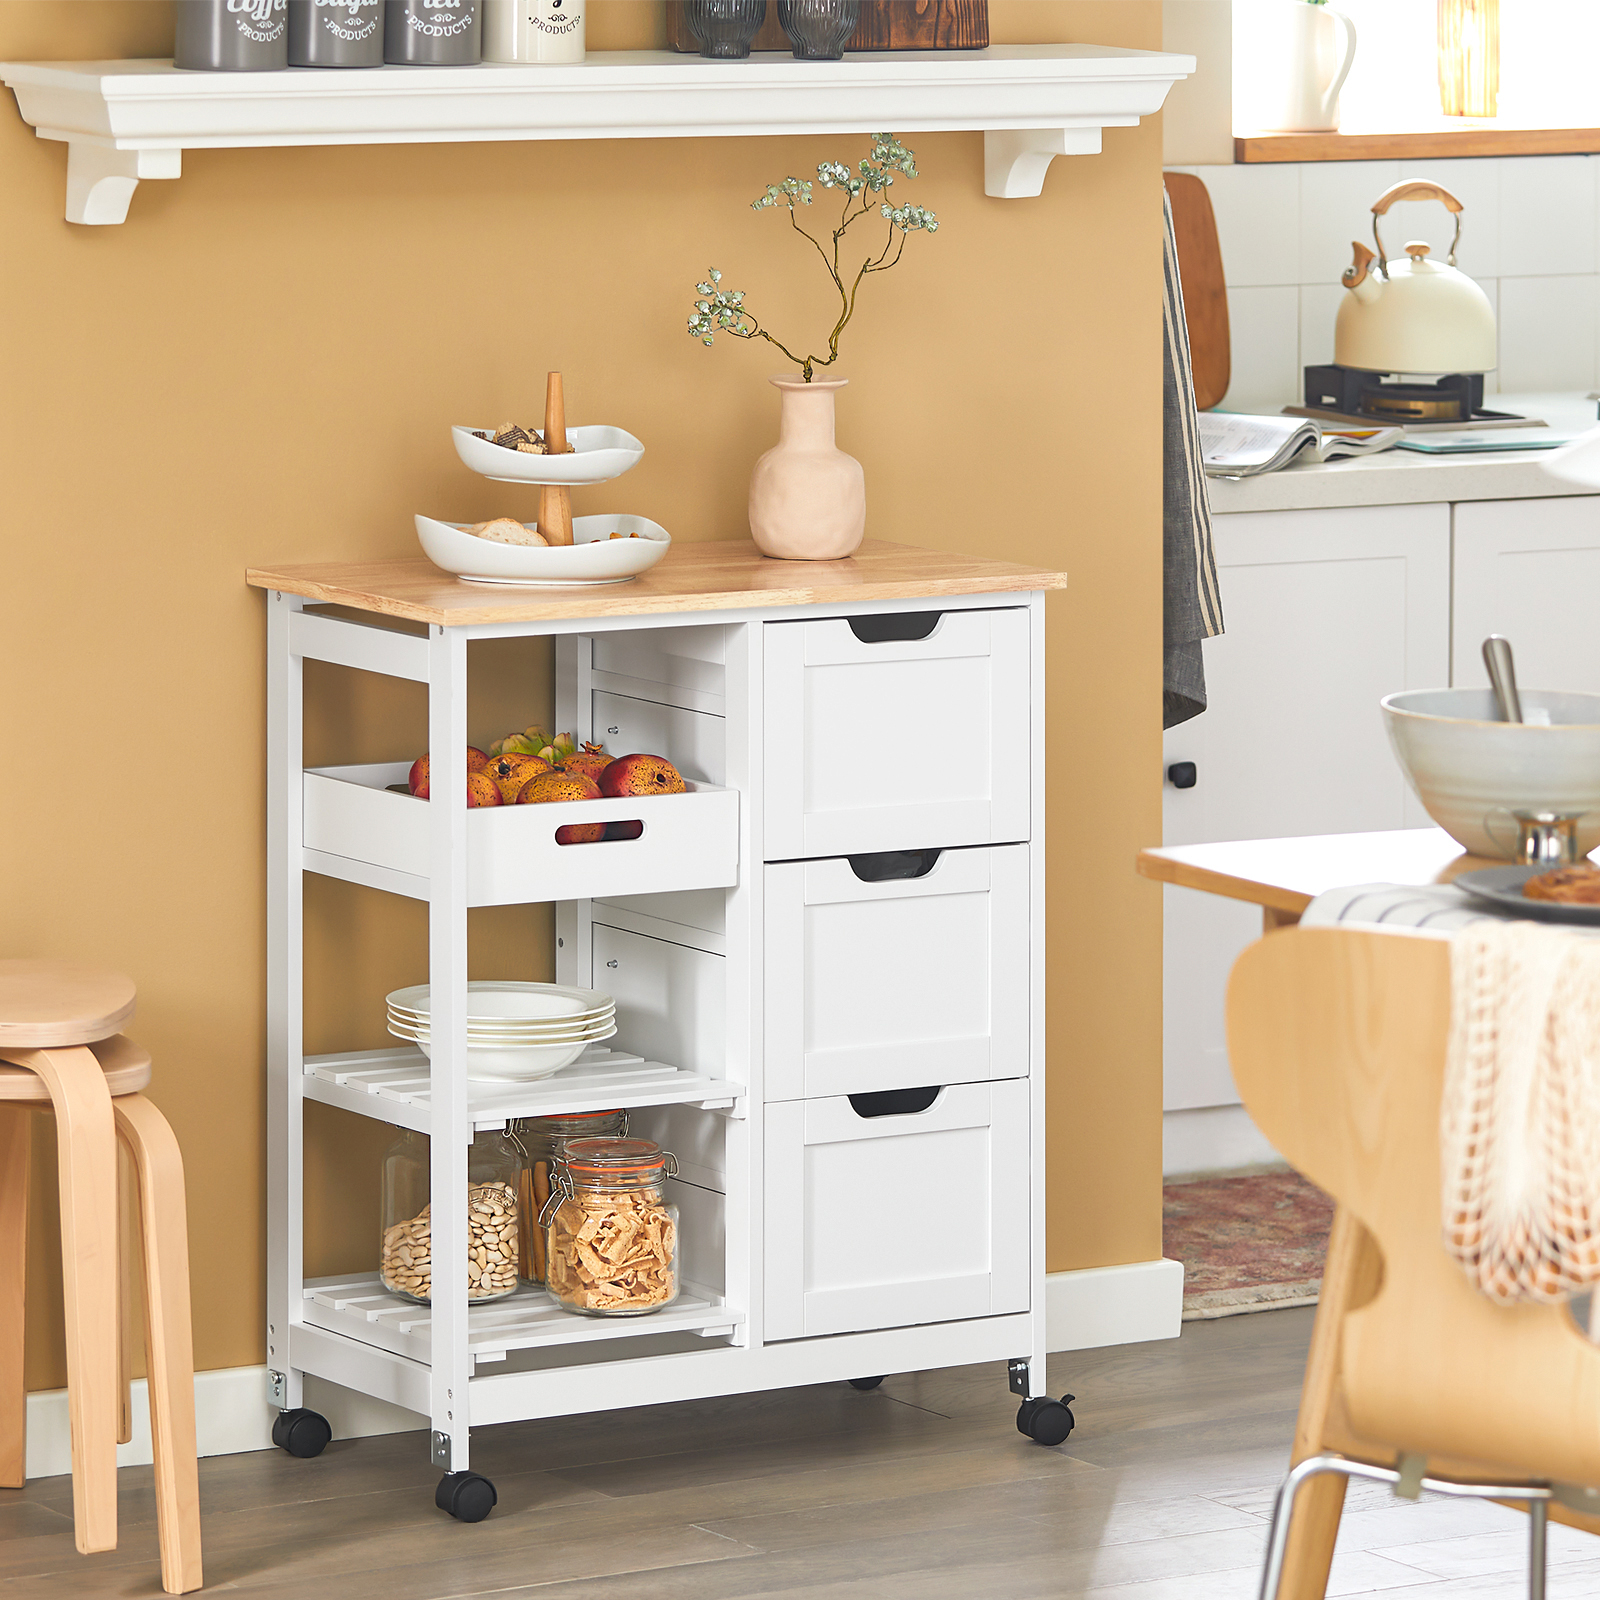 SoBuy FKW79-W,Kitchen Serving Cart with 3 Drawers and Removable Tray,Kitchen Storage Trolley,White